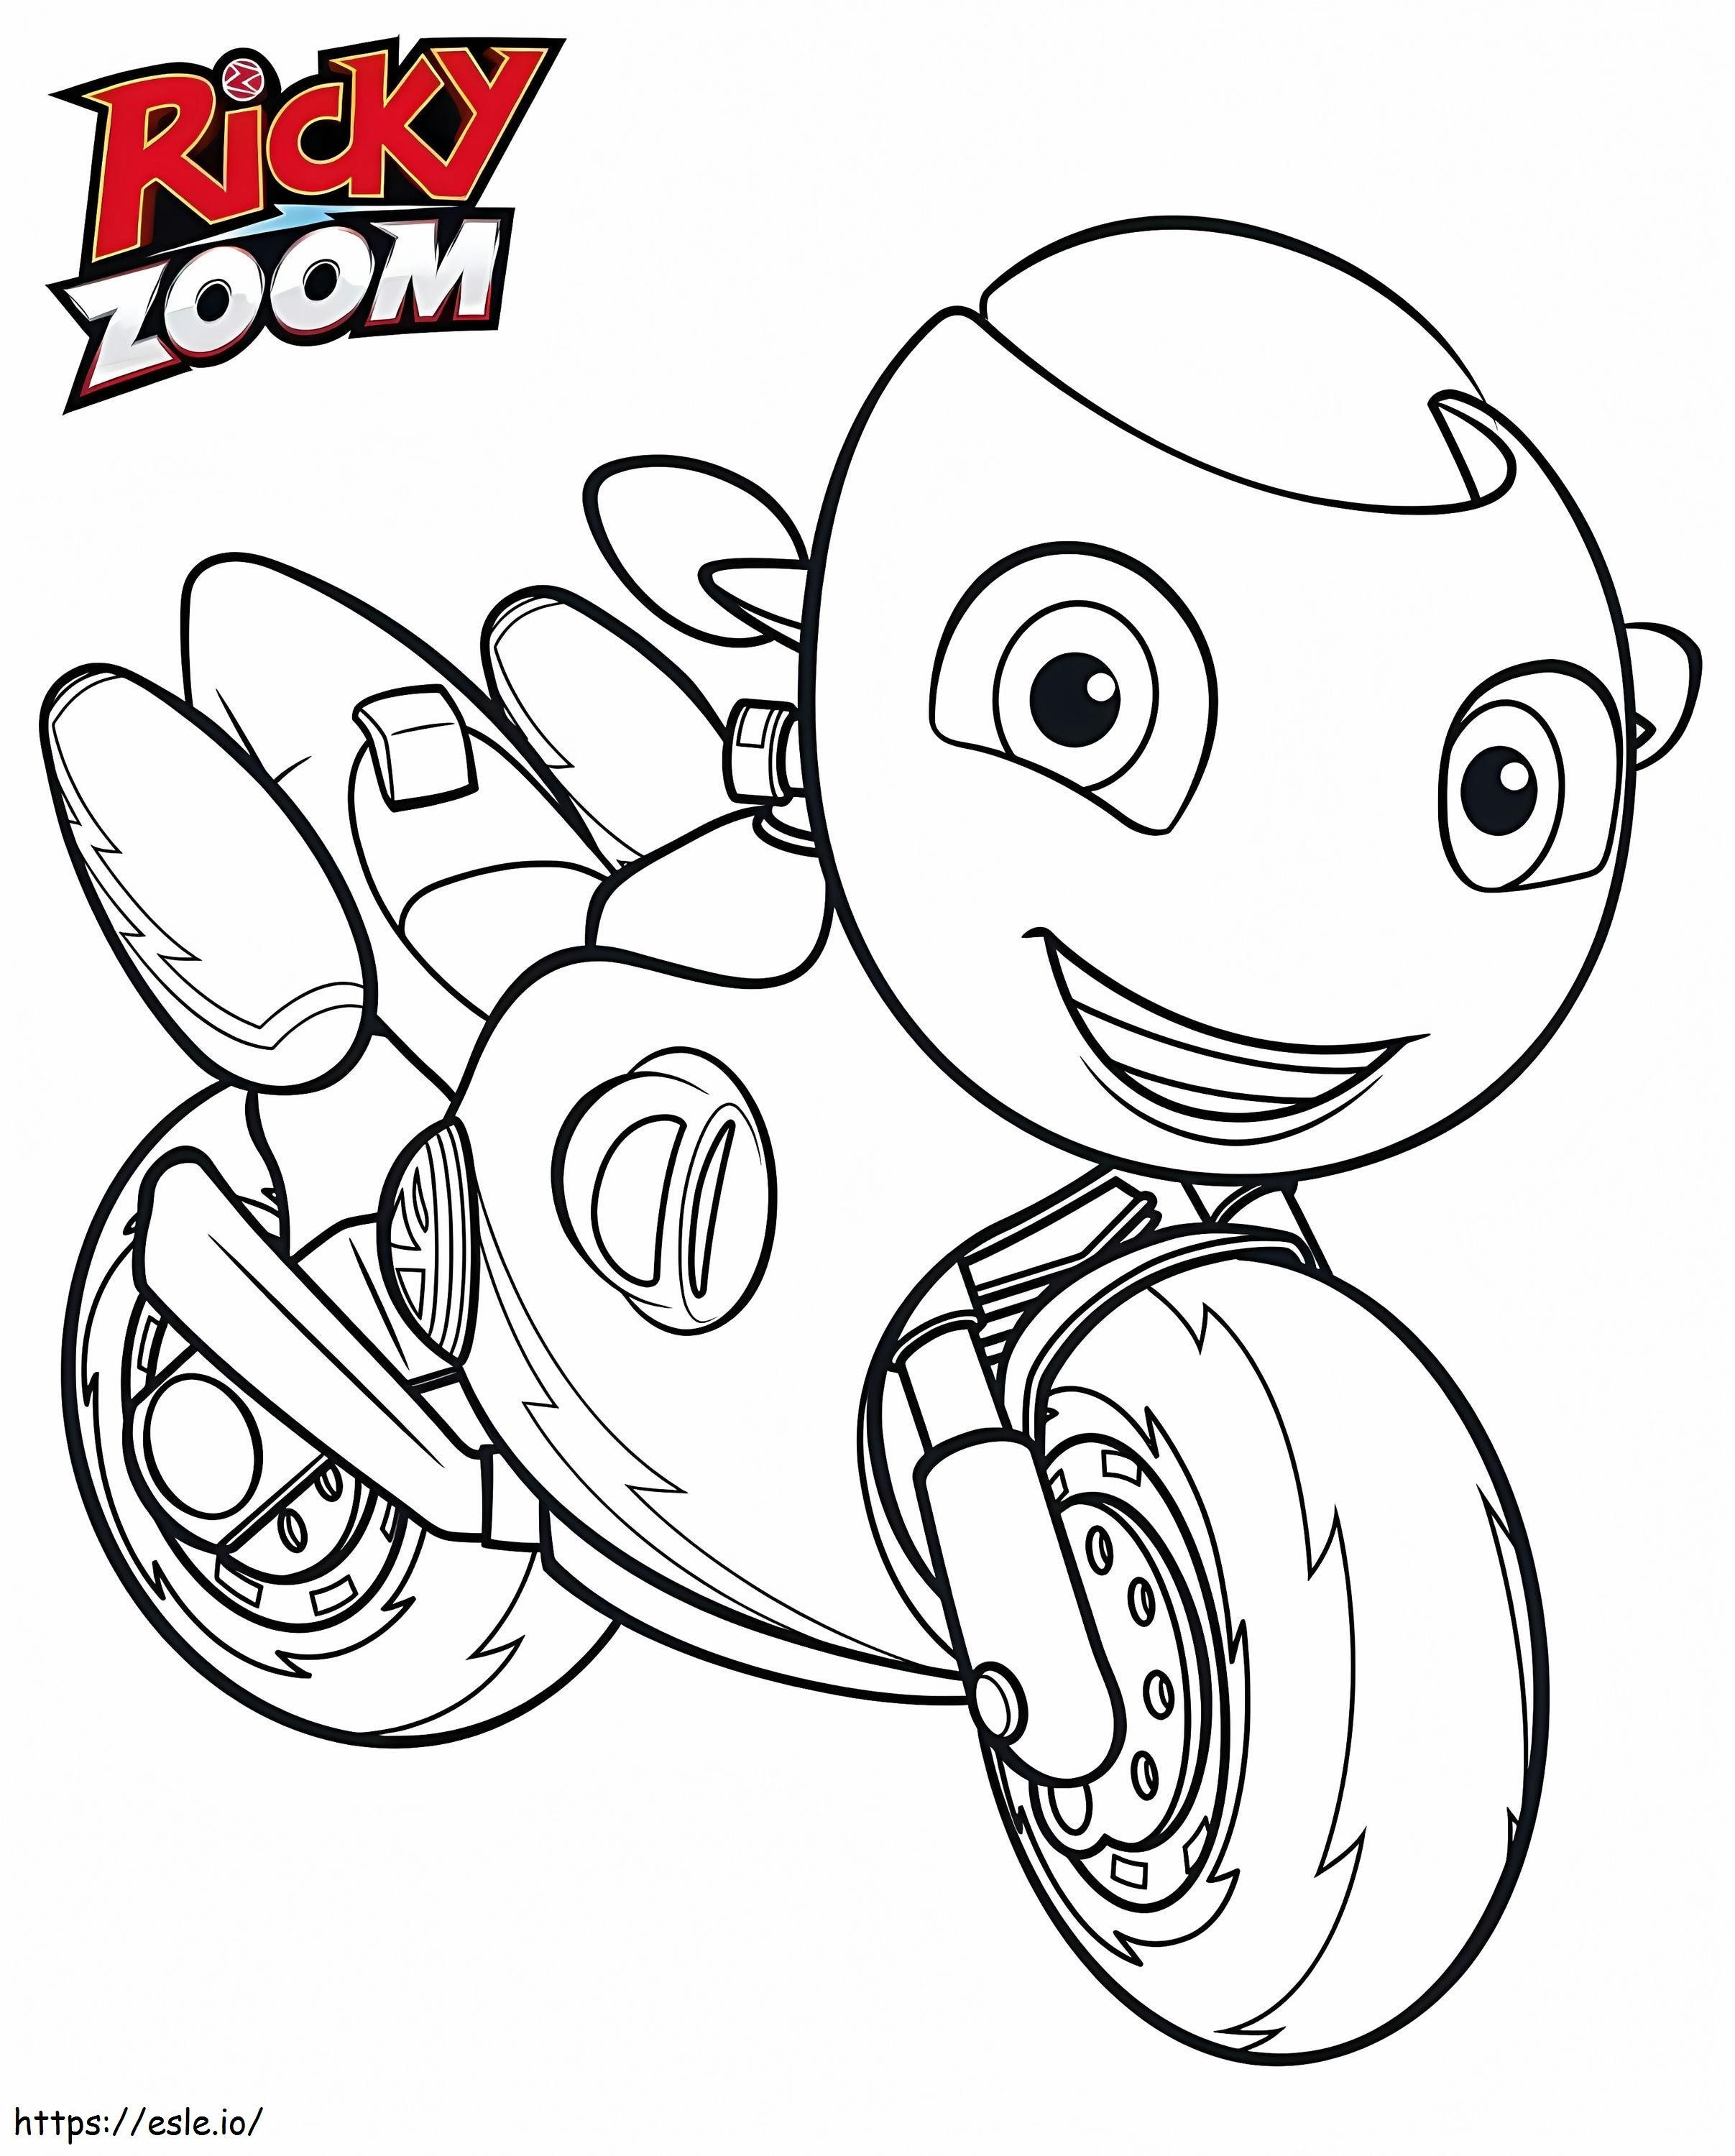 1 coloring page